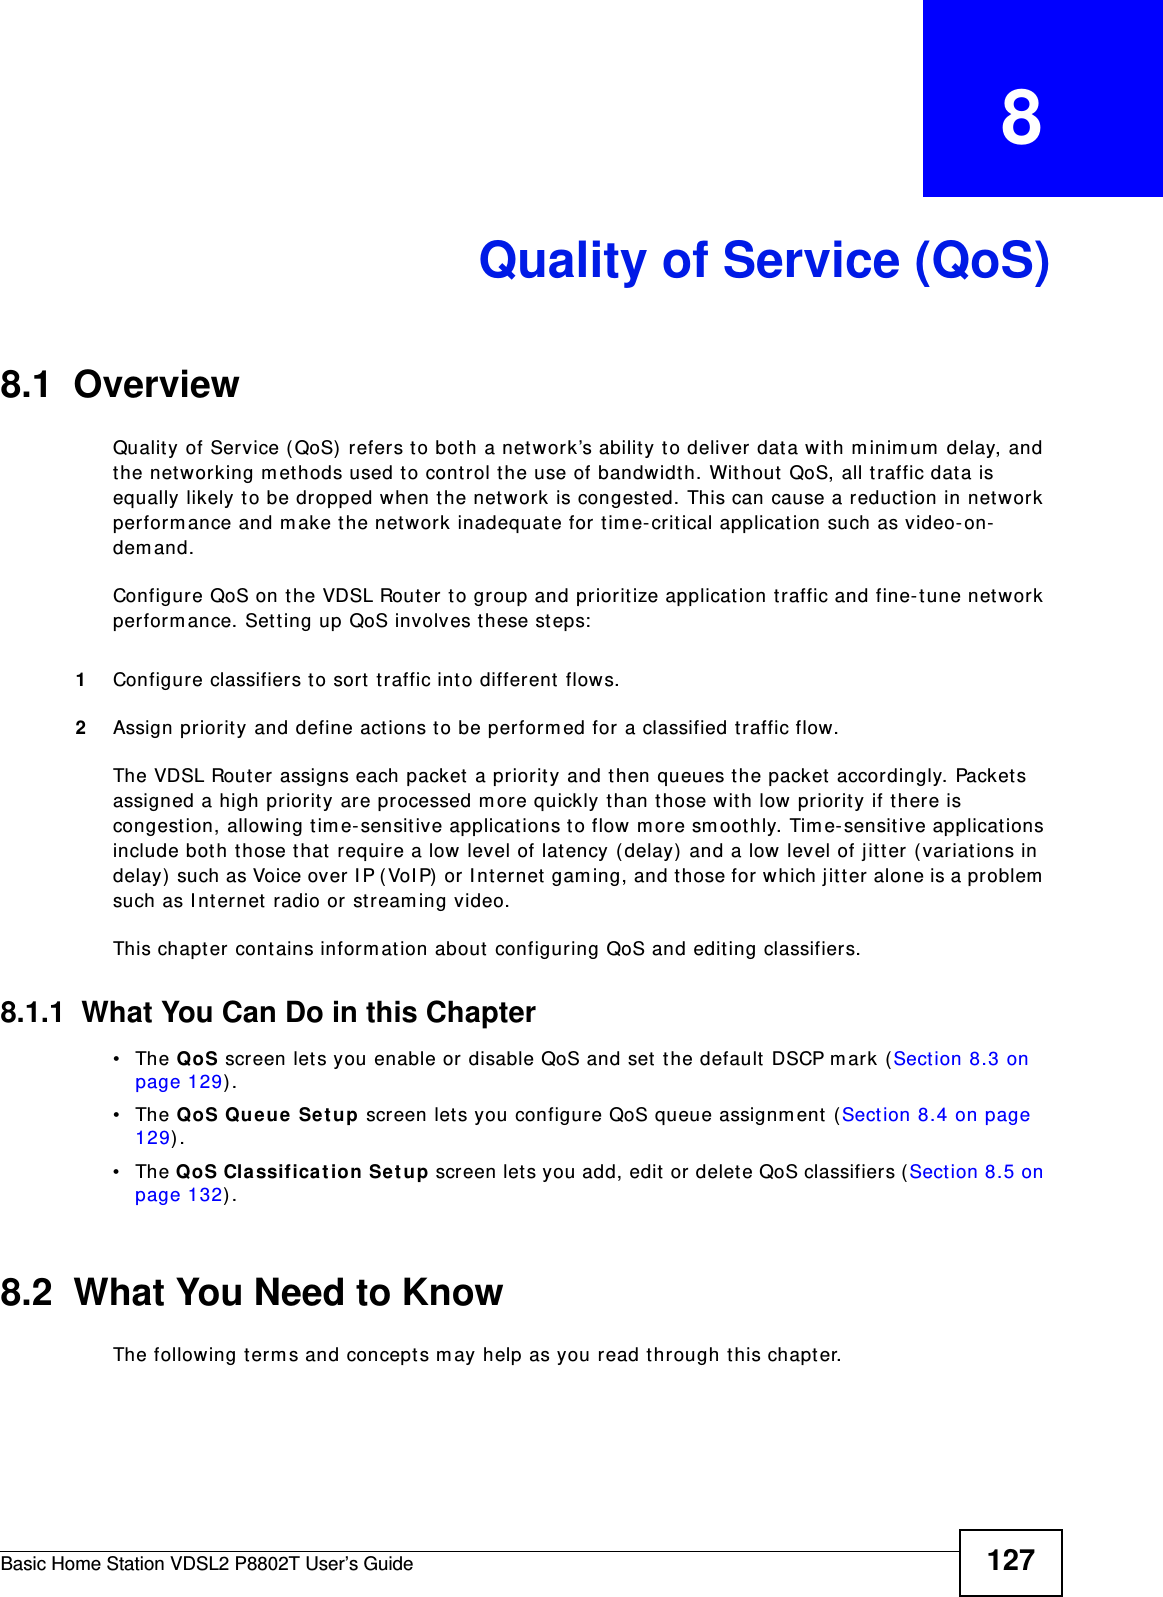 Basic Home Station VDSL2 P8802T User’s Guide 127CHAPTER   8Quality of Service (QoS)8.1  Overview Qualit y of Service ( QoS)  refers t o both a network’s ability t o deliver data wit h m inim um  delay, and the net working m et hods used t o control the use of bandwidt h. Without QoS, all t raffic data is equally likely t o be dropped w hen the net work is congest ed. This can cause a reduct ion in net work perform ance and m ake t he net work inadequat e for tim e- crit ical applicat ion such as video-on-dem and.Configure QoS on t he VDSL Router to group and pr ioritize applicat ion traffic and fine- t une net work perform ance. Set t ing up QoS involves these st eps:1Configure classifiers t o sort traffic into different flows. 2Assign priority and define act ions t o be perform ed for a classified t raffic flow. The VDSL Router assigns each packet  a priorit y and then queues the packet accor dingly. Packet s assigned a high priorit y are processed m ore quickly t han t hose wit h low priority if t here is congest ion, allowing tim e- sensitive applications to flow m ore sm oot hly. Tim e- sensitive applicat ions include both t hose t hat  require a low level of lat ency ( delay)  and a low level of jit ter  (variat ions in delay )  such as Voi ce ov er  I P ( VoI P)  o r  I nt er n et  gam ing, and those for which jit t er alone is a problem such as I nt ernet radio or st ream ing video.This chapt er cont ains inform ation about configuring QoS and editing classifiers.8.1.1  What You Can Do in this Chapter• The QoS screen lets you enable or disable QoS and set  t he default DSCP m ark (Section 8.3 on page 129) .• The QoS Qu eu e Set u p screen let s you configure QoS queue assignm ent  (Sect ion 8.4 on page 129) .• The QoS Classifica t ion Setup screen let s you add, edit  or delete QoS classifiers ( Sect ion 8.5 on page 132) .8.2  What You Need to KnowThe following t erm s and concept s m ay help as you read t hrough this chapt er.